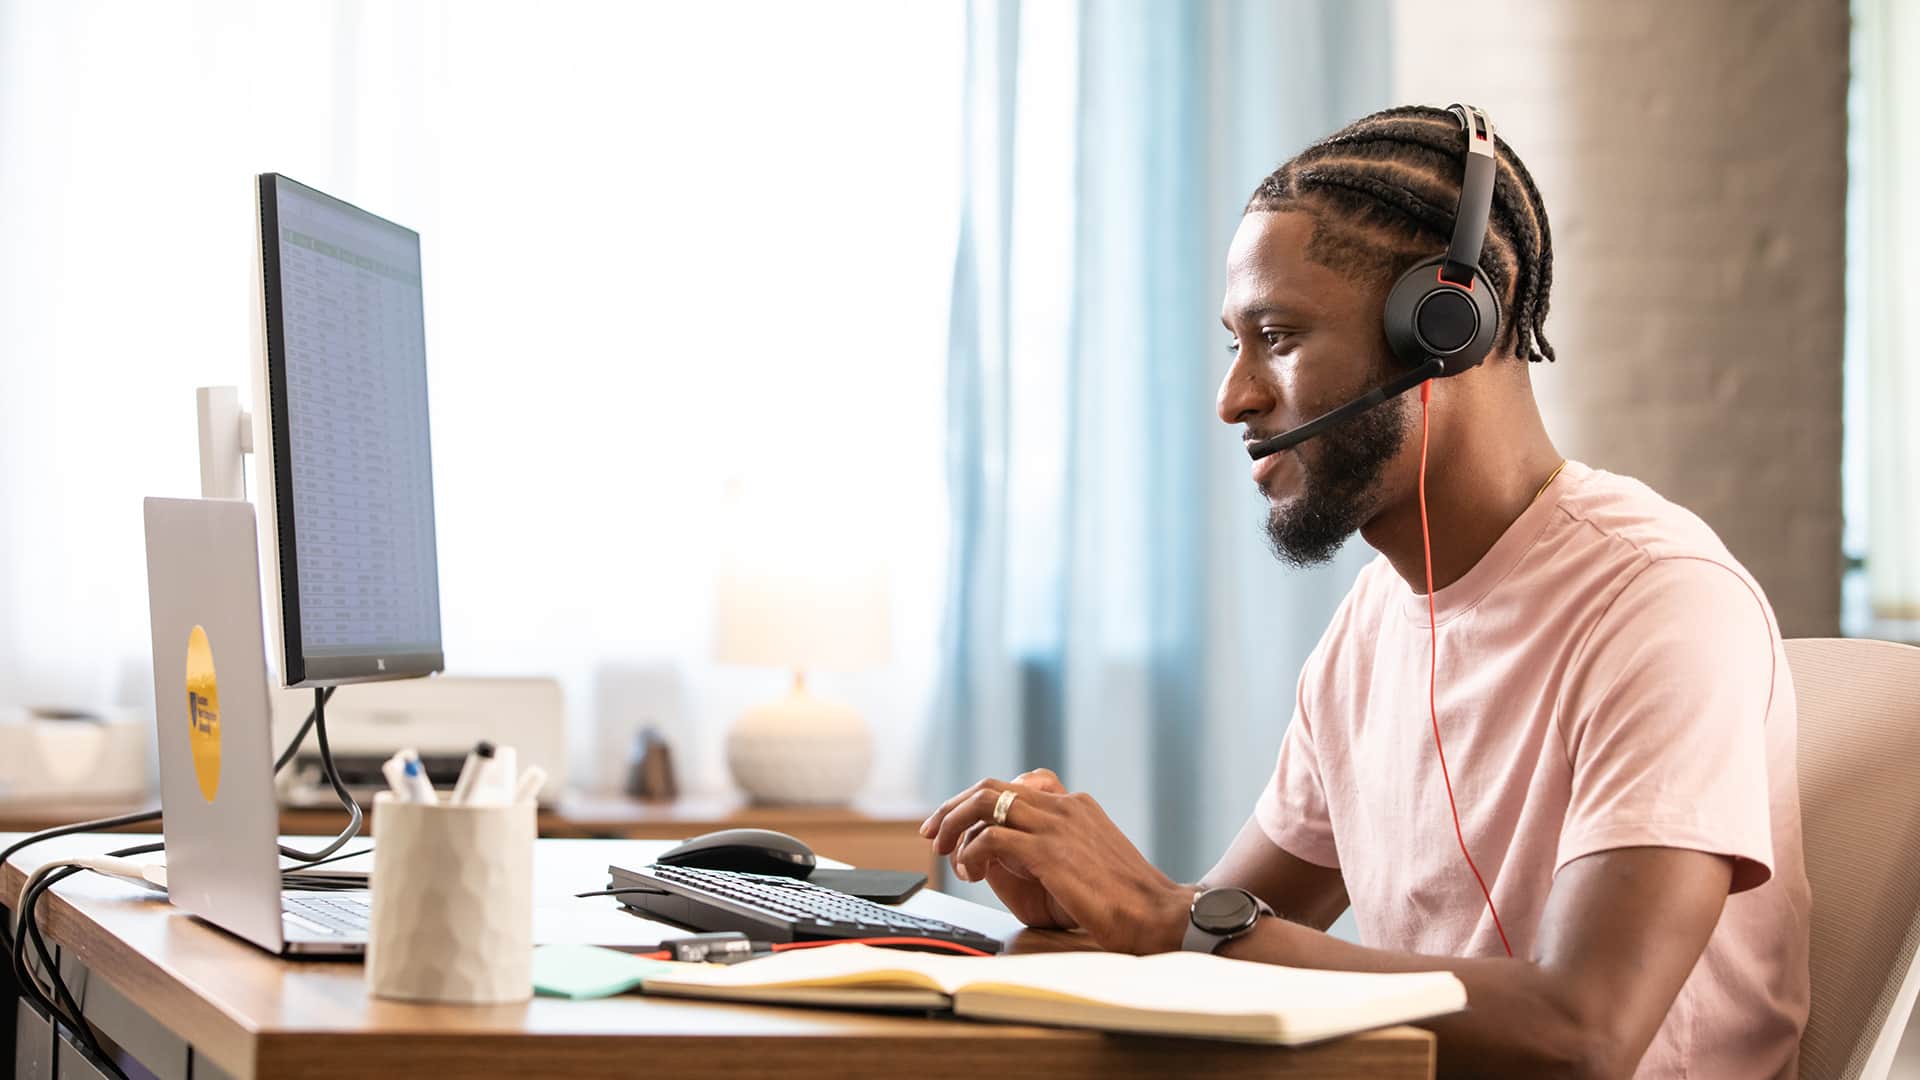 Matt Seawright, who earned a degree in operations and supply chain management in 2019, working on his laptop at a desk and wearing a headset including headphones and microphone.